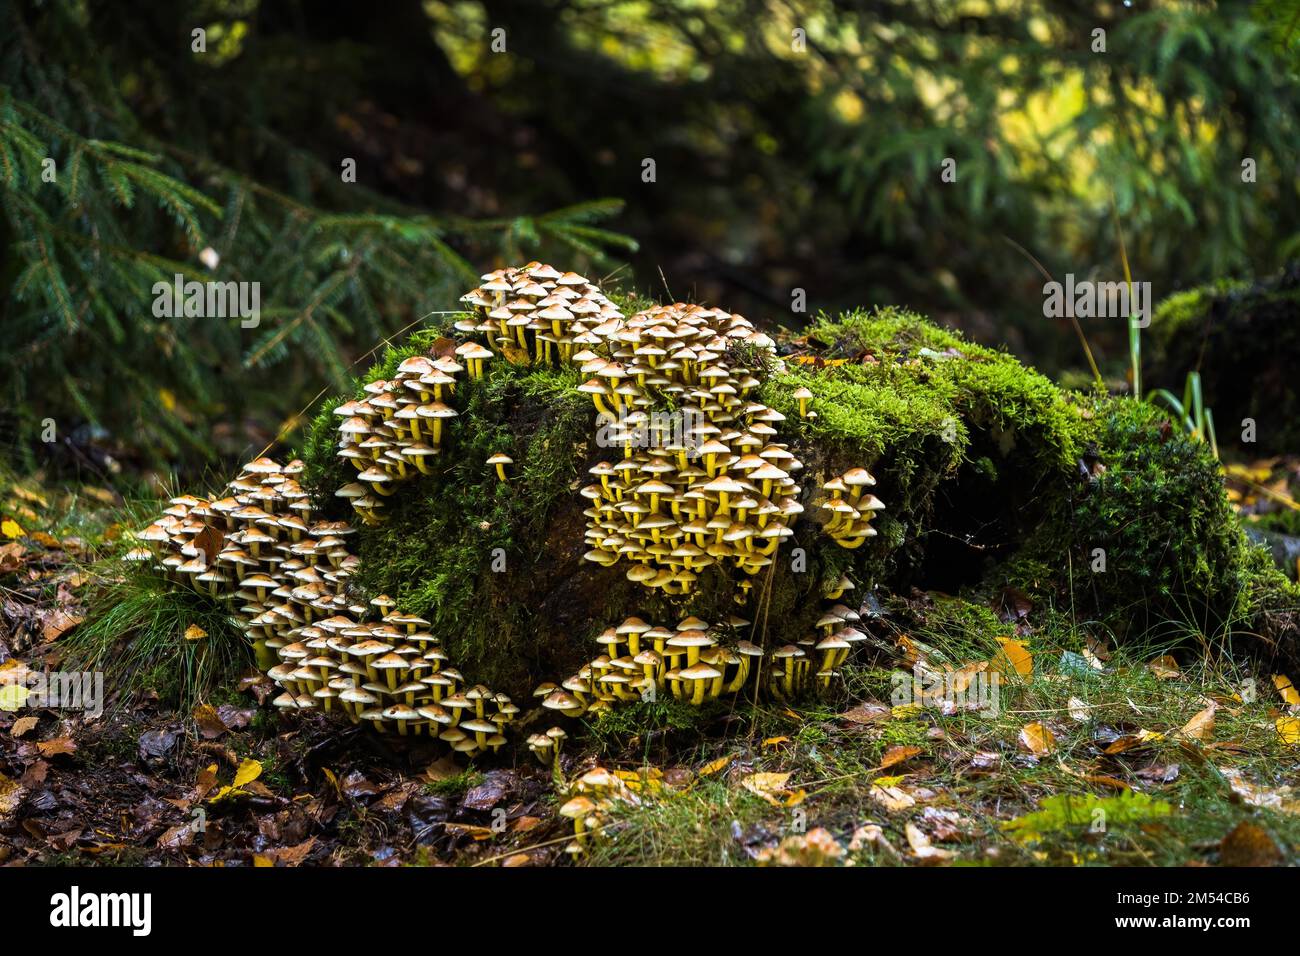 Sulphur tufts (Hypholoma fasciculare) on moss-covered tree stump, Hesse, Germany Stock Photo